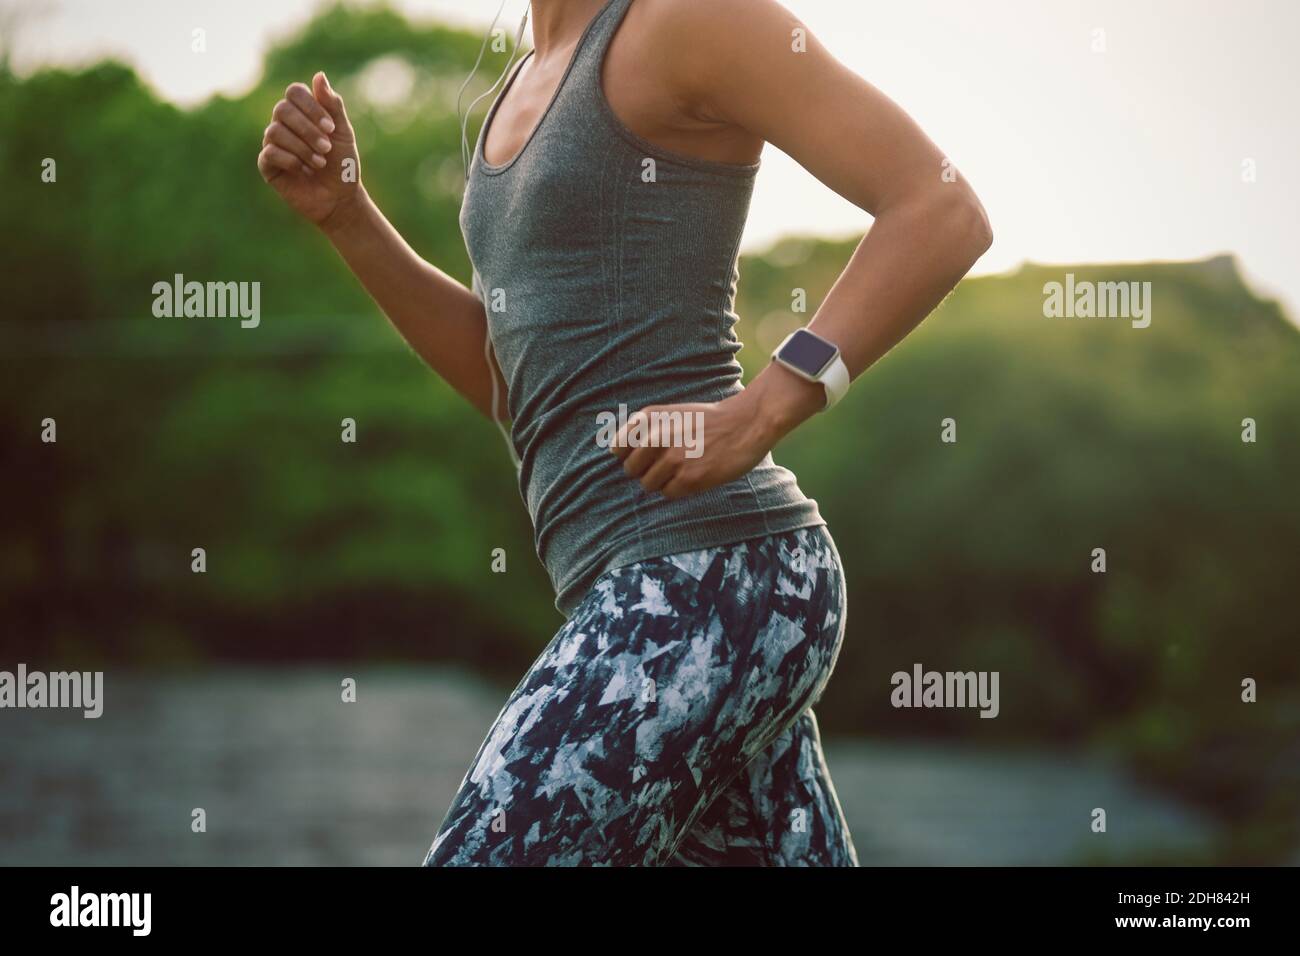 Midsection of woman running at park Stock Photo